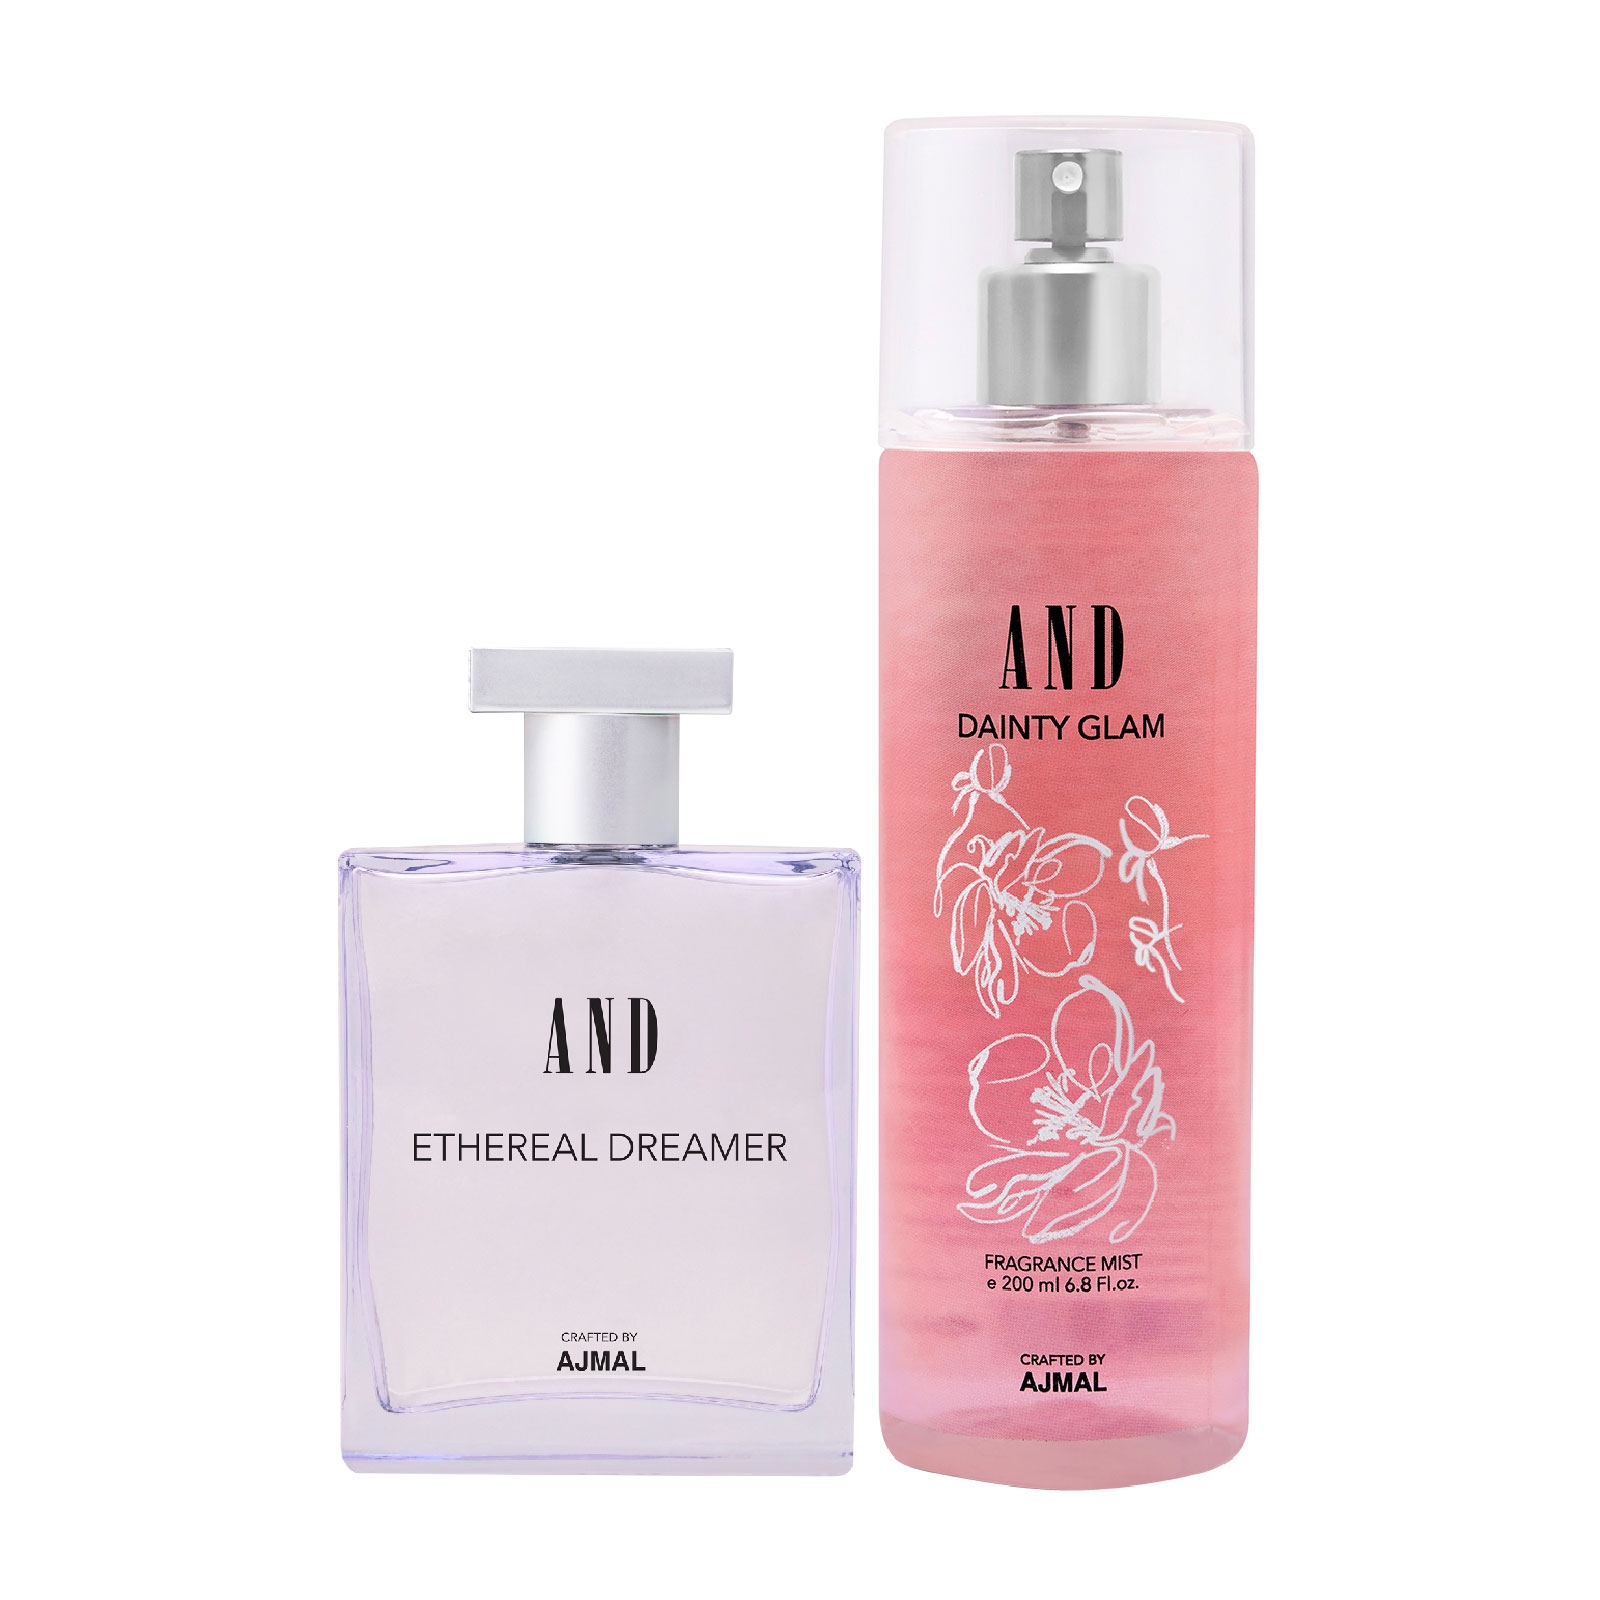 AND Crafted By Ajmal | AND Ethereal Dreamer EDP 50ML & Dainty Glam Body Mist 200ML Pack of 2 for Women Crafted by Ajmal + 2 Parfum Testers